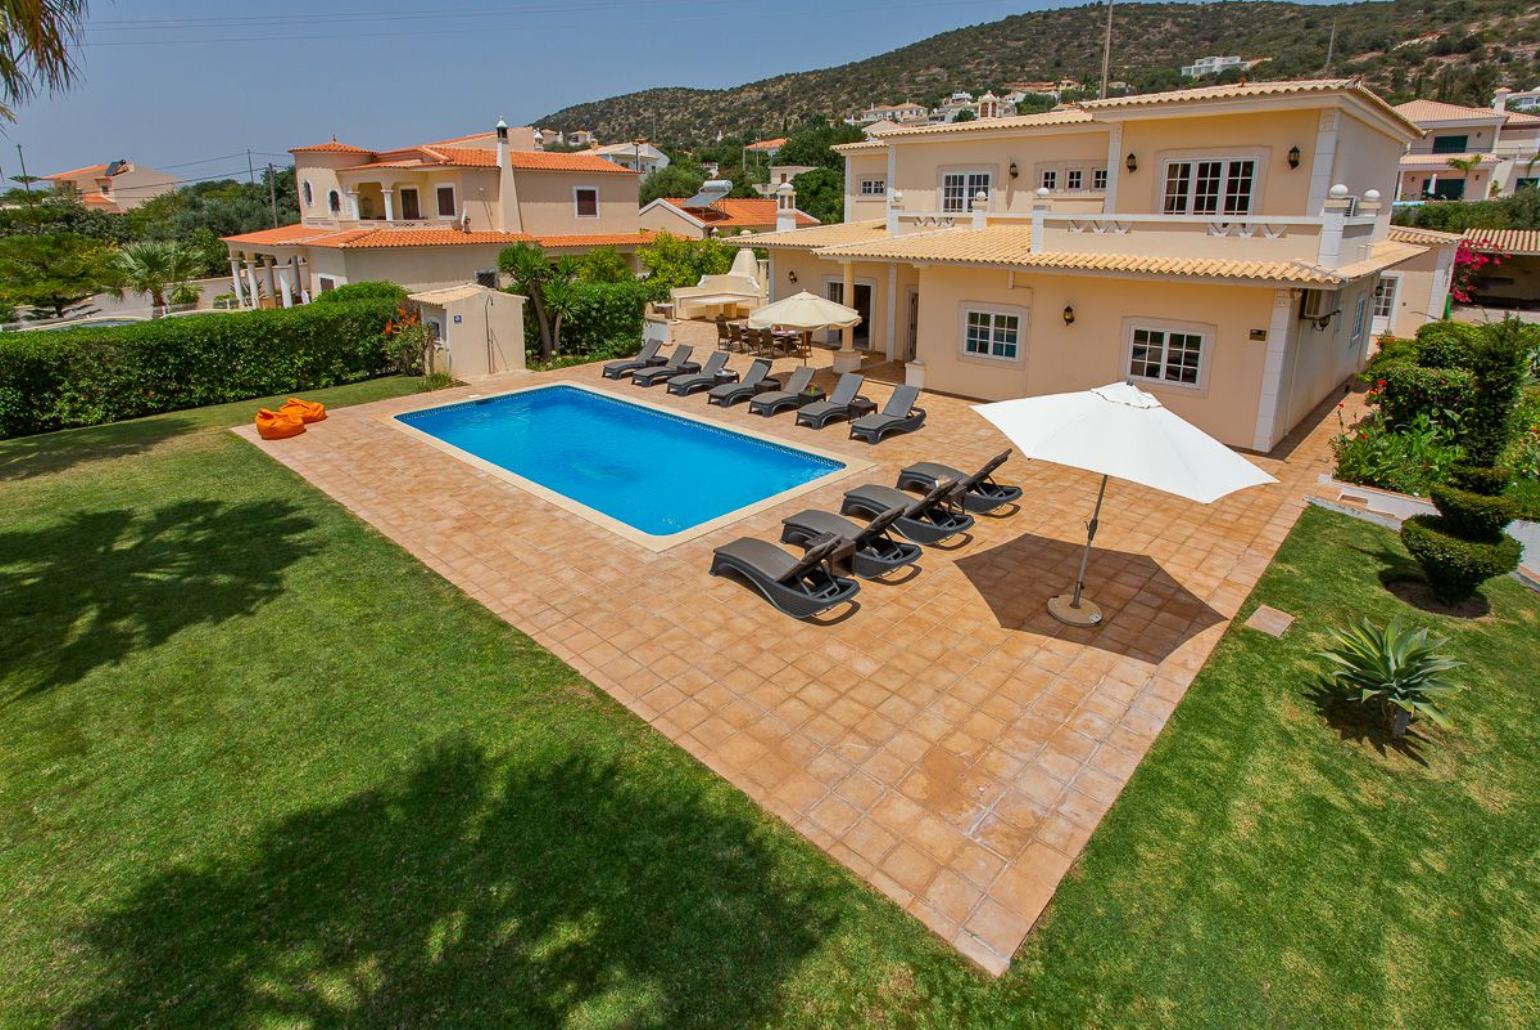 Beautiful villa with private pool and terrace area.